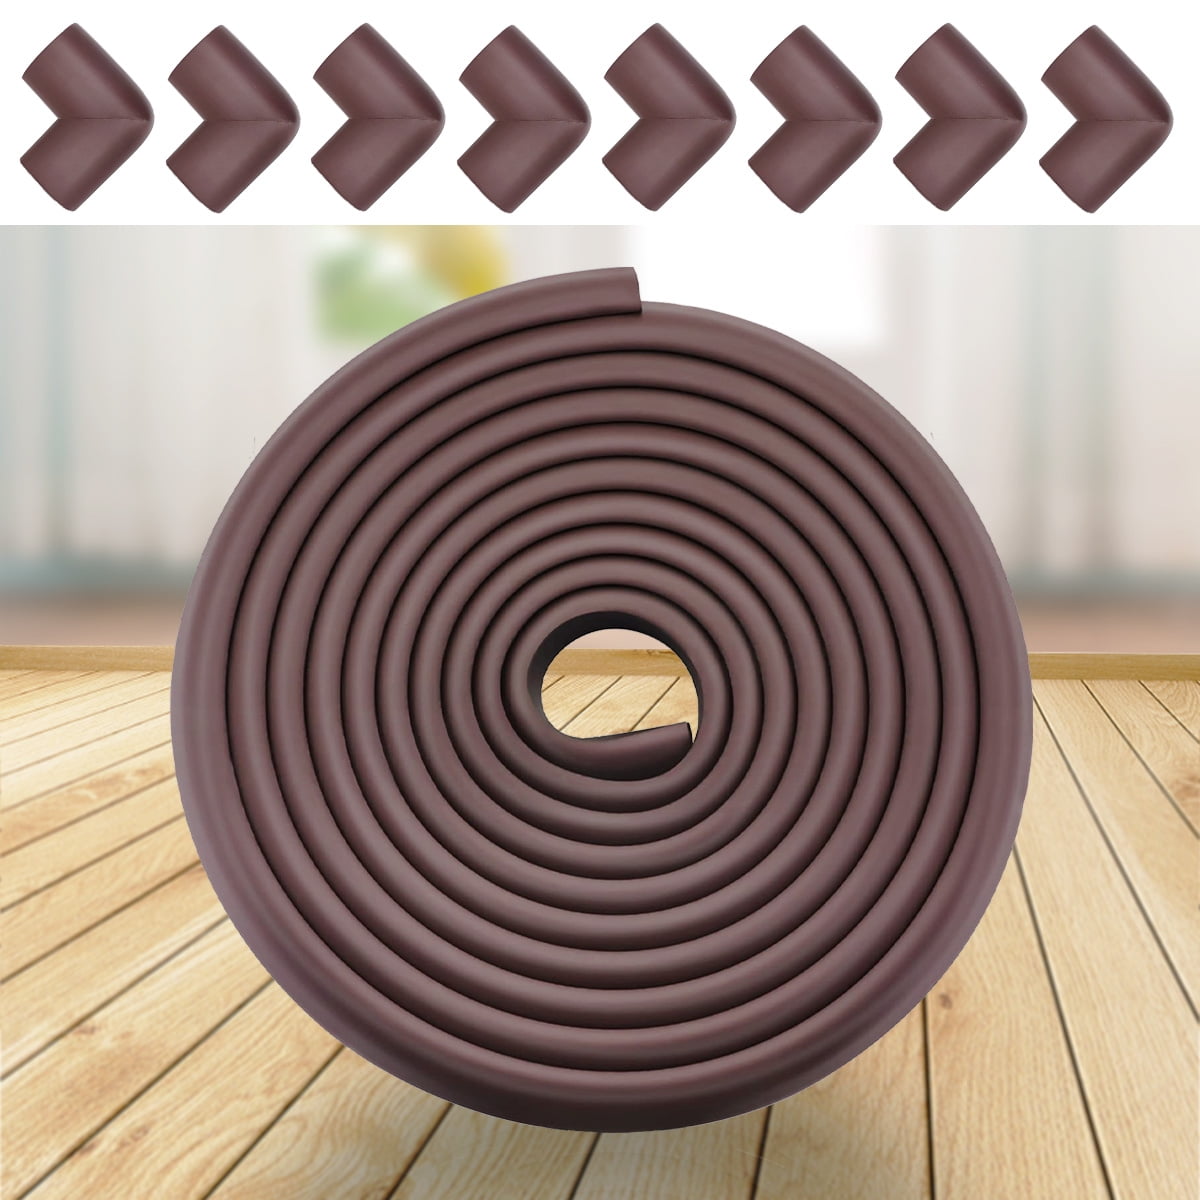 Soft Caring Baby Corners Safe Corner Cushion Foam Rubber Table Furniture Bumper Child Safety Brown Roving Cove Baby Proofing Corner Guards Edge Protectors Pre-Taped 4-Piece Coffee 